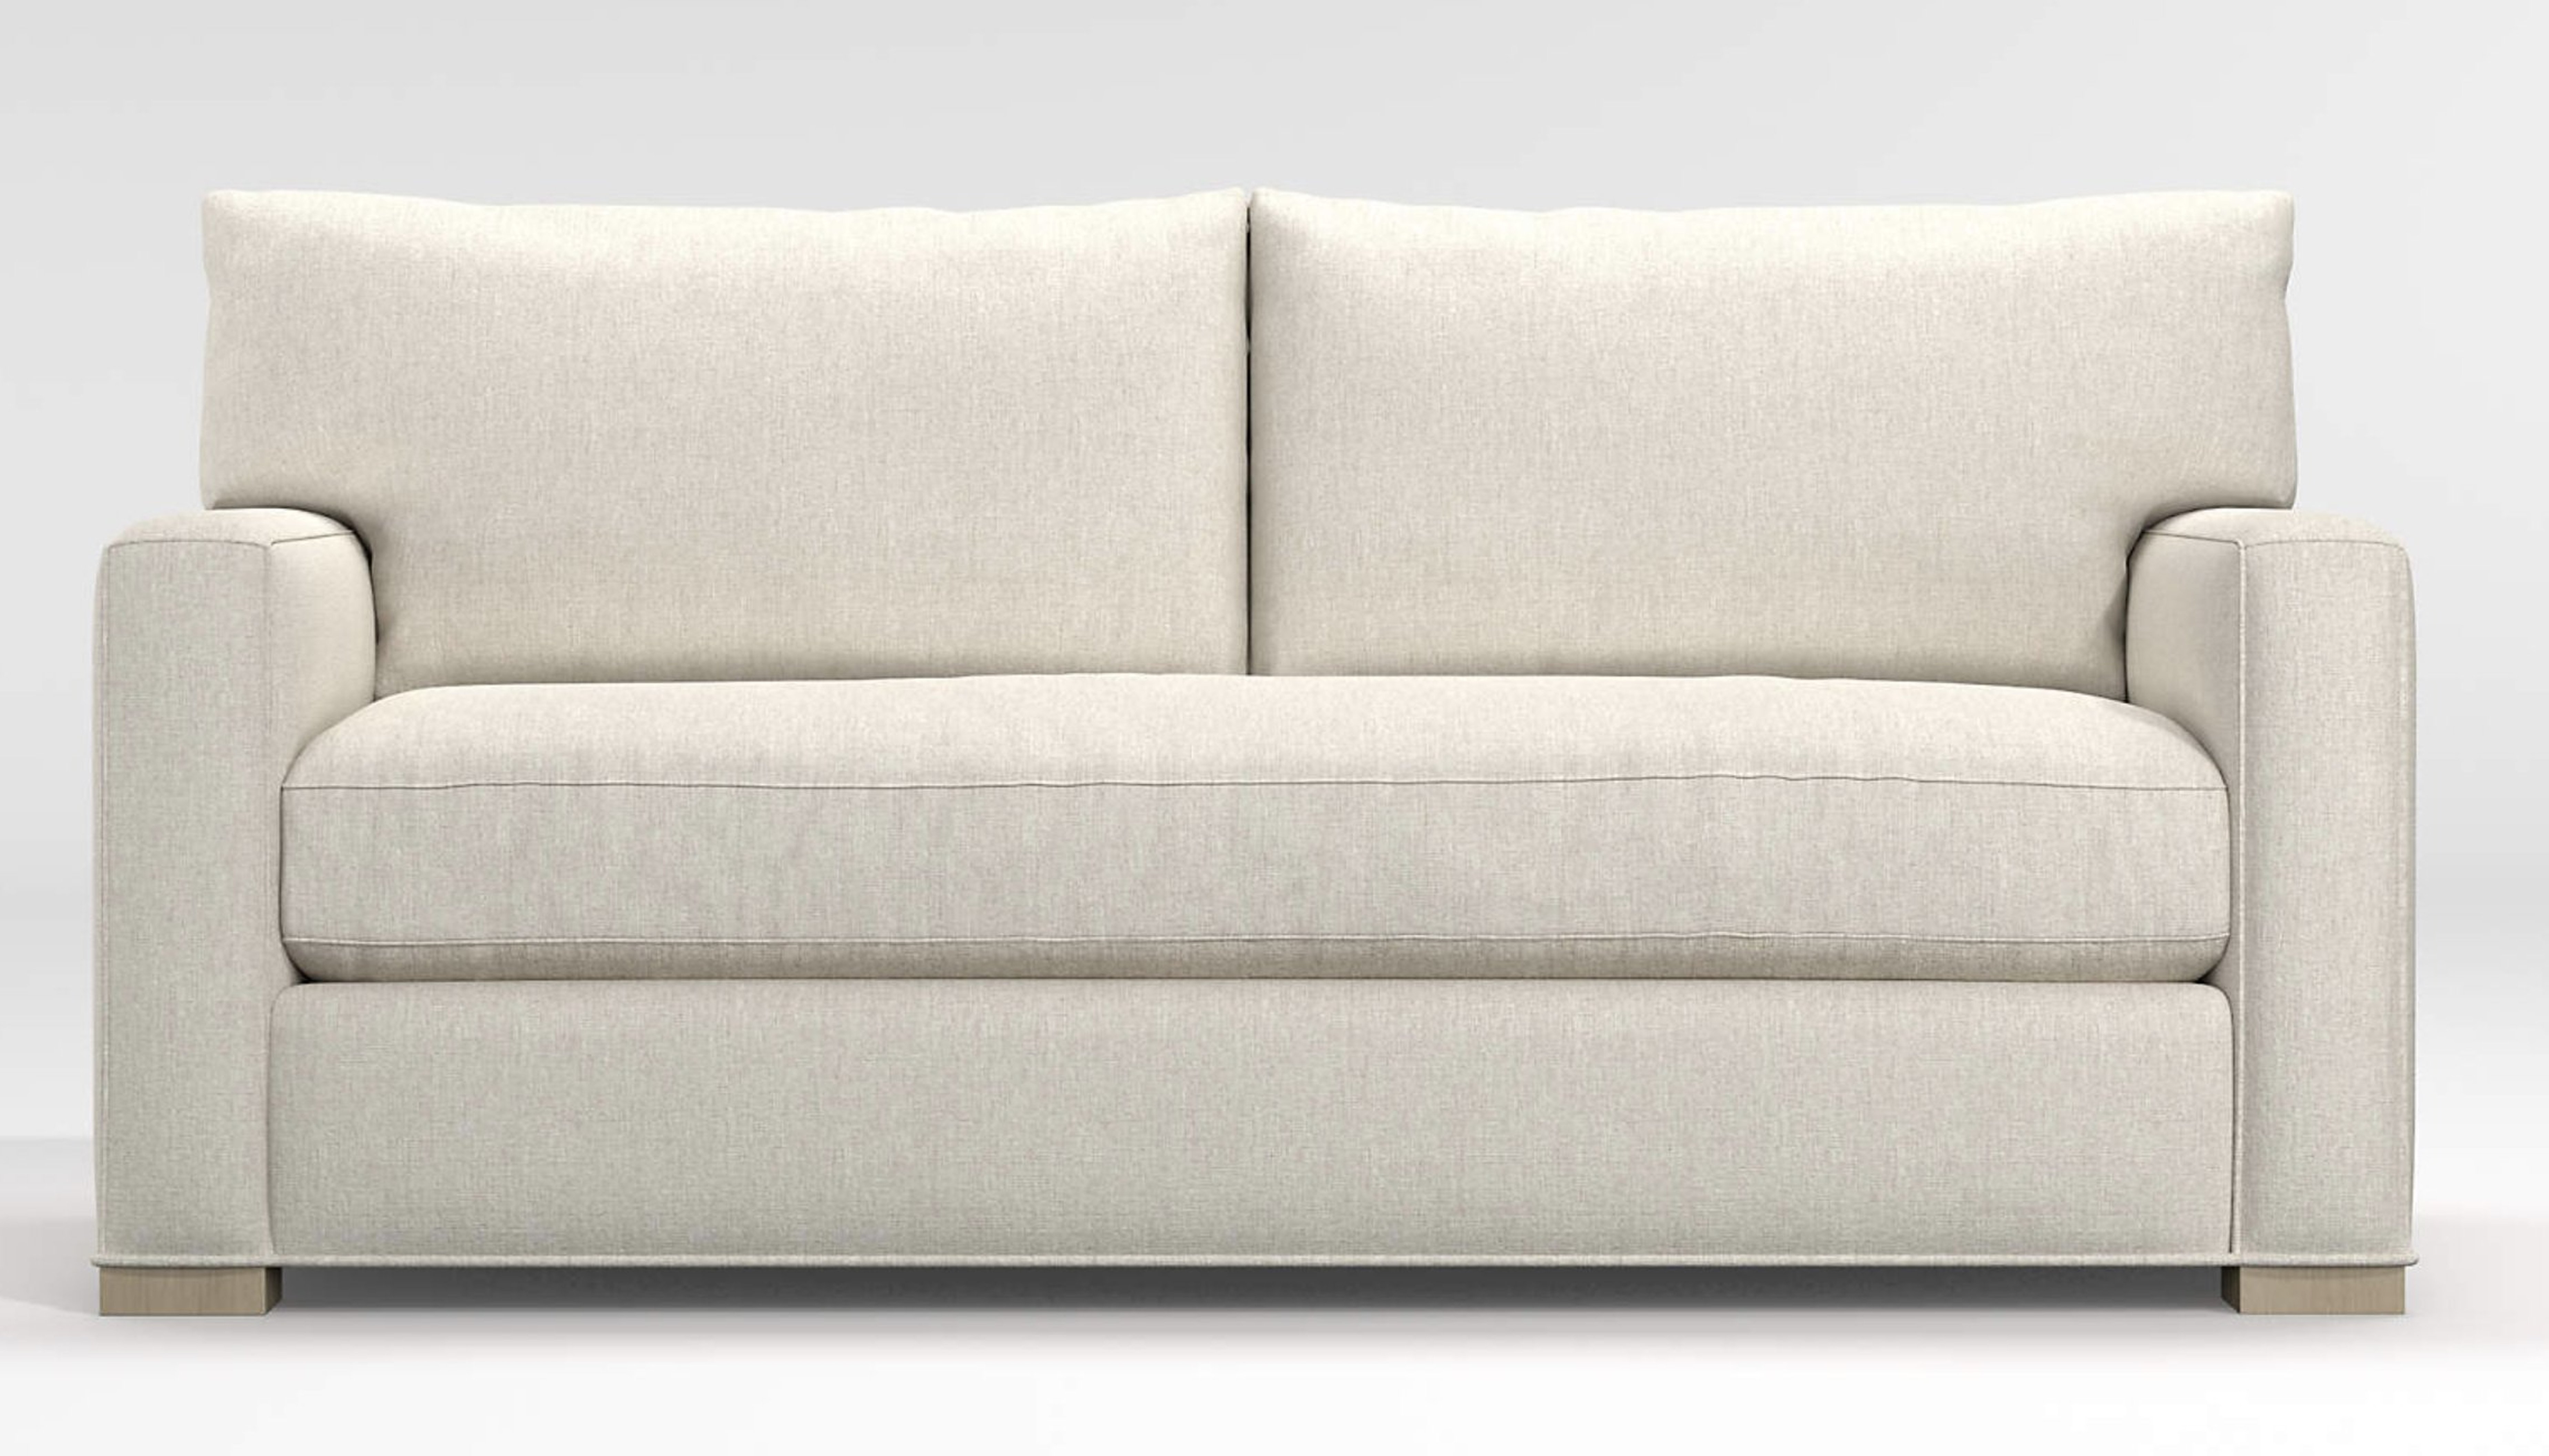 Axis Bench Apartment Sofa - Crate and Barrel